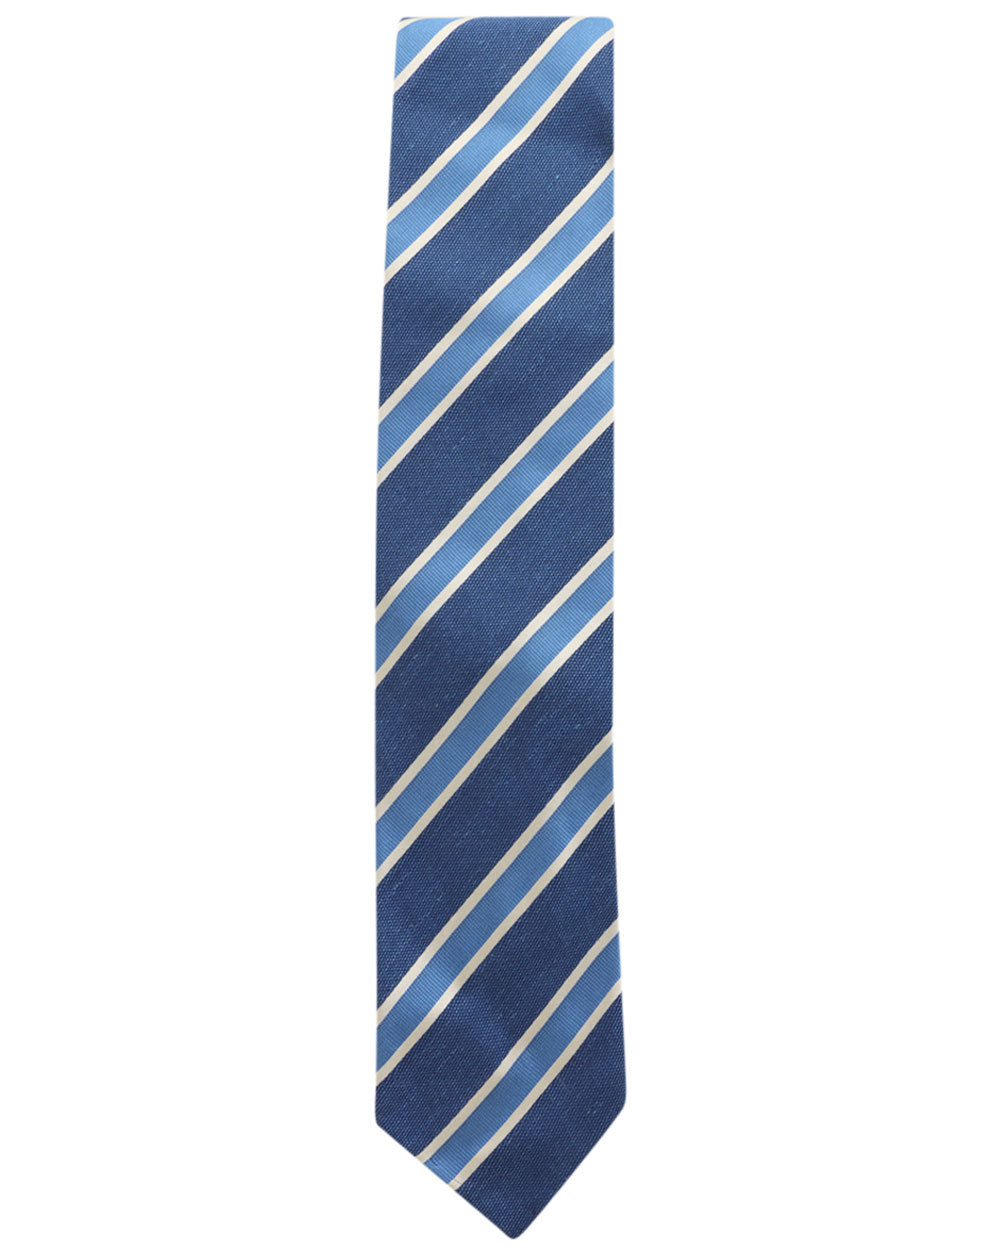 Sky Blue and White Striped Linen Blend Tie